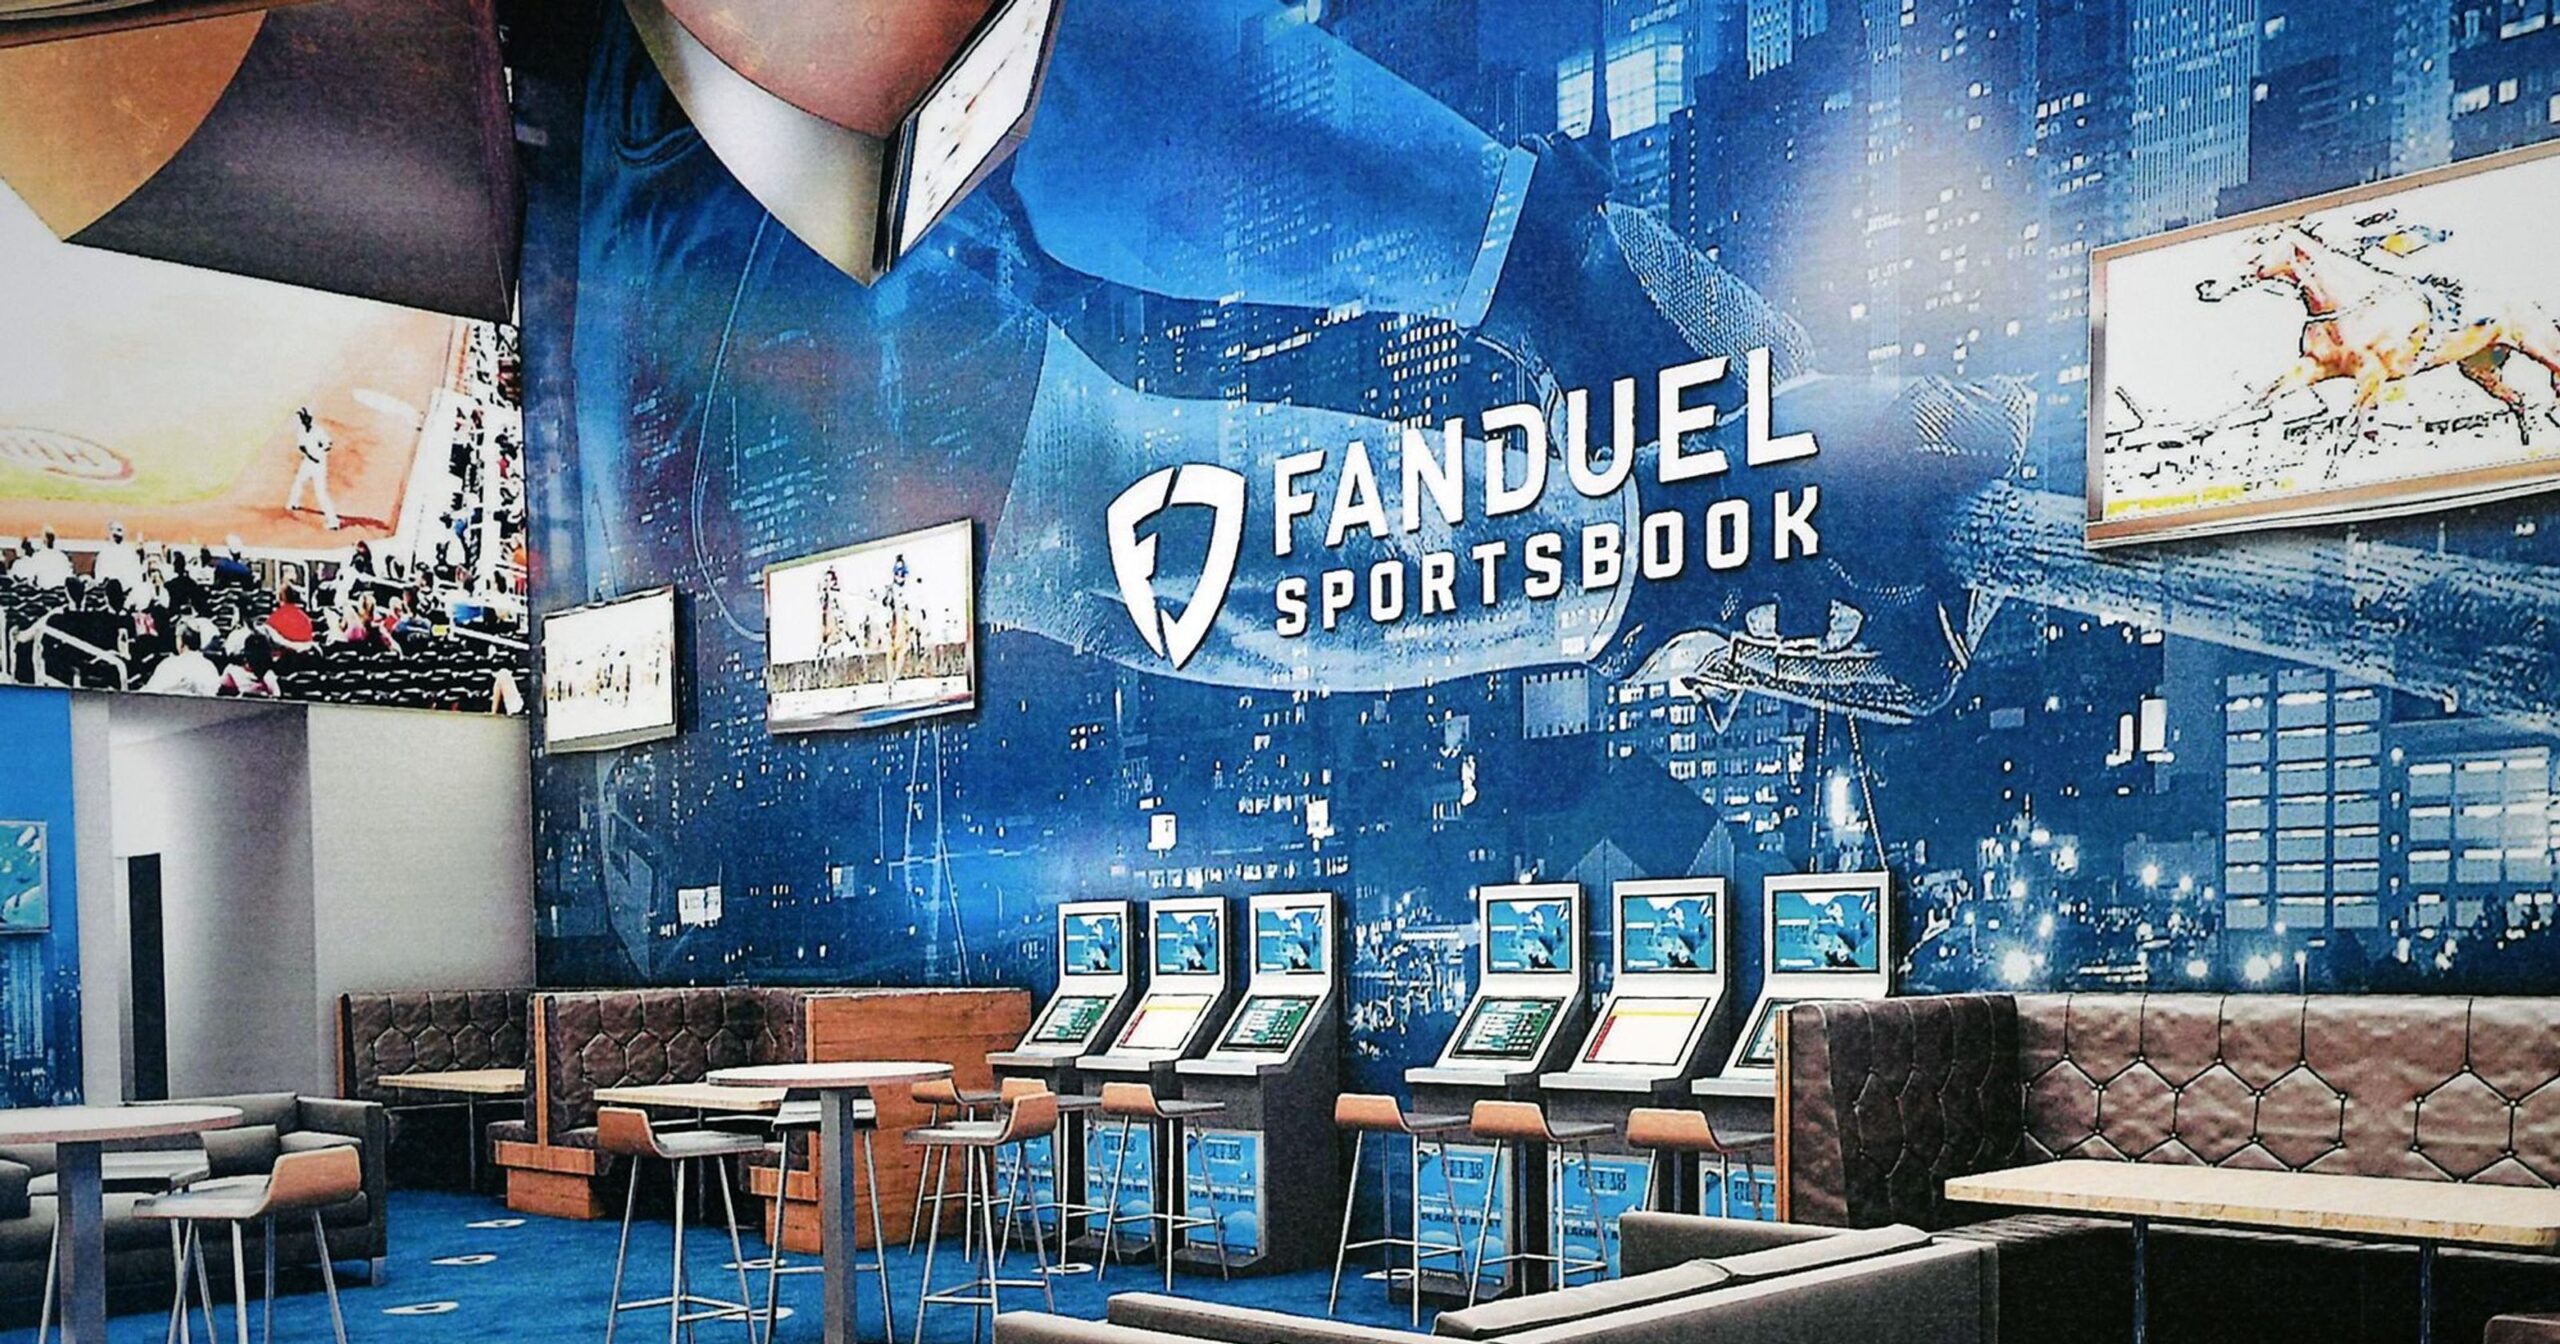 Saving Face: FanDuel Sportsbook to Pay Out Big Winners After System Glitch